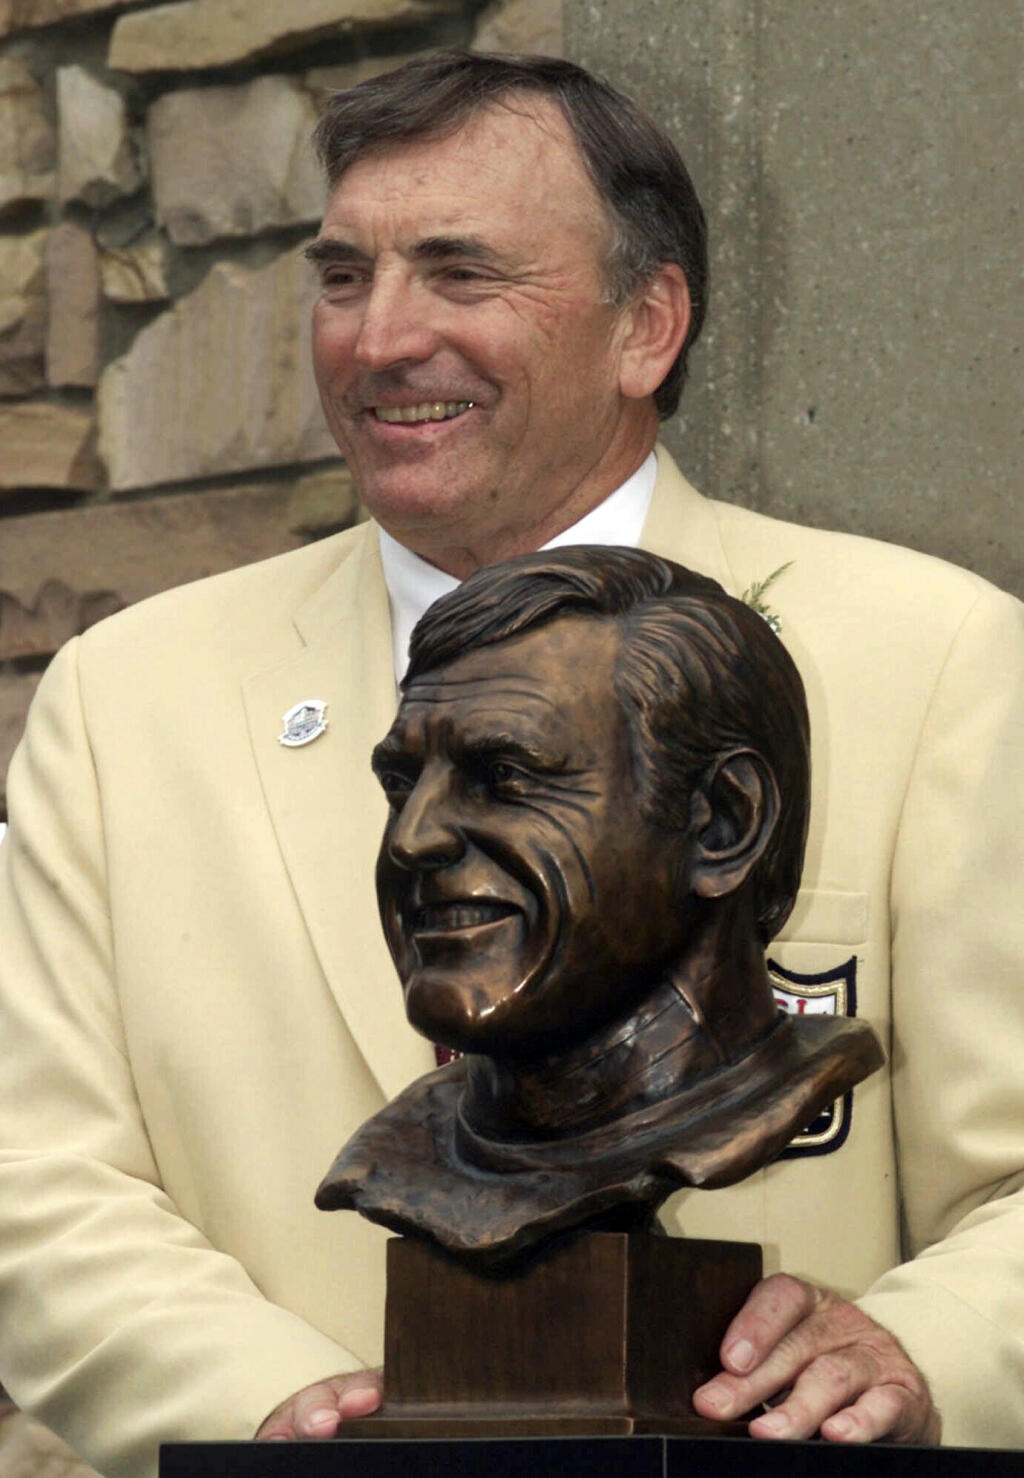 FILE -Former San Francisco 49ers great Dave Wilcox poses with his bust after enshrinement into the Pro Football Hall of Fame Saturday, July 29, 2000, in Canton, Ohio. Hall of Fame linebacker Dave Wilcox, who made the Pro Bowl seven times in his 11 seasons with the San Francisco 49ers, has died. He was 80. The Pro Football Hall of Fame said Wilcox, who is also the father of California football coach Justin Wilcox, died on Wednesday, April 19, 2023. (AP Photo/Mark Duncan, File)